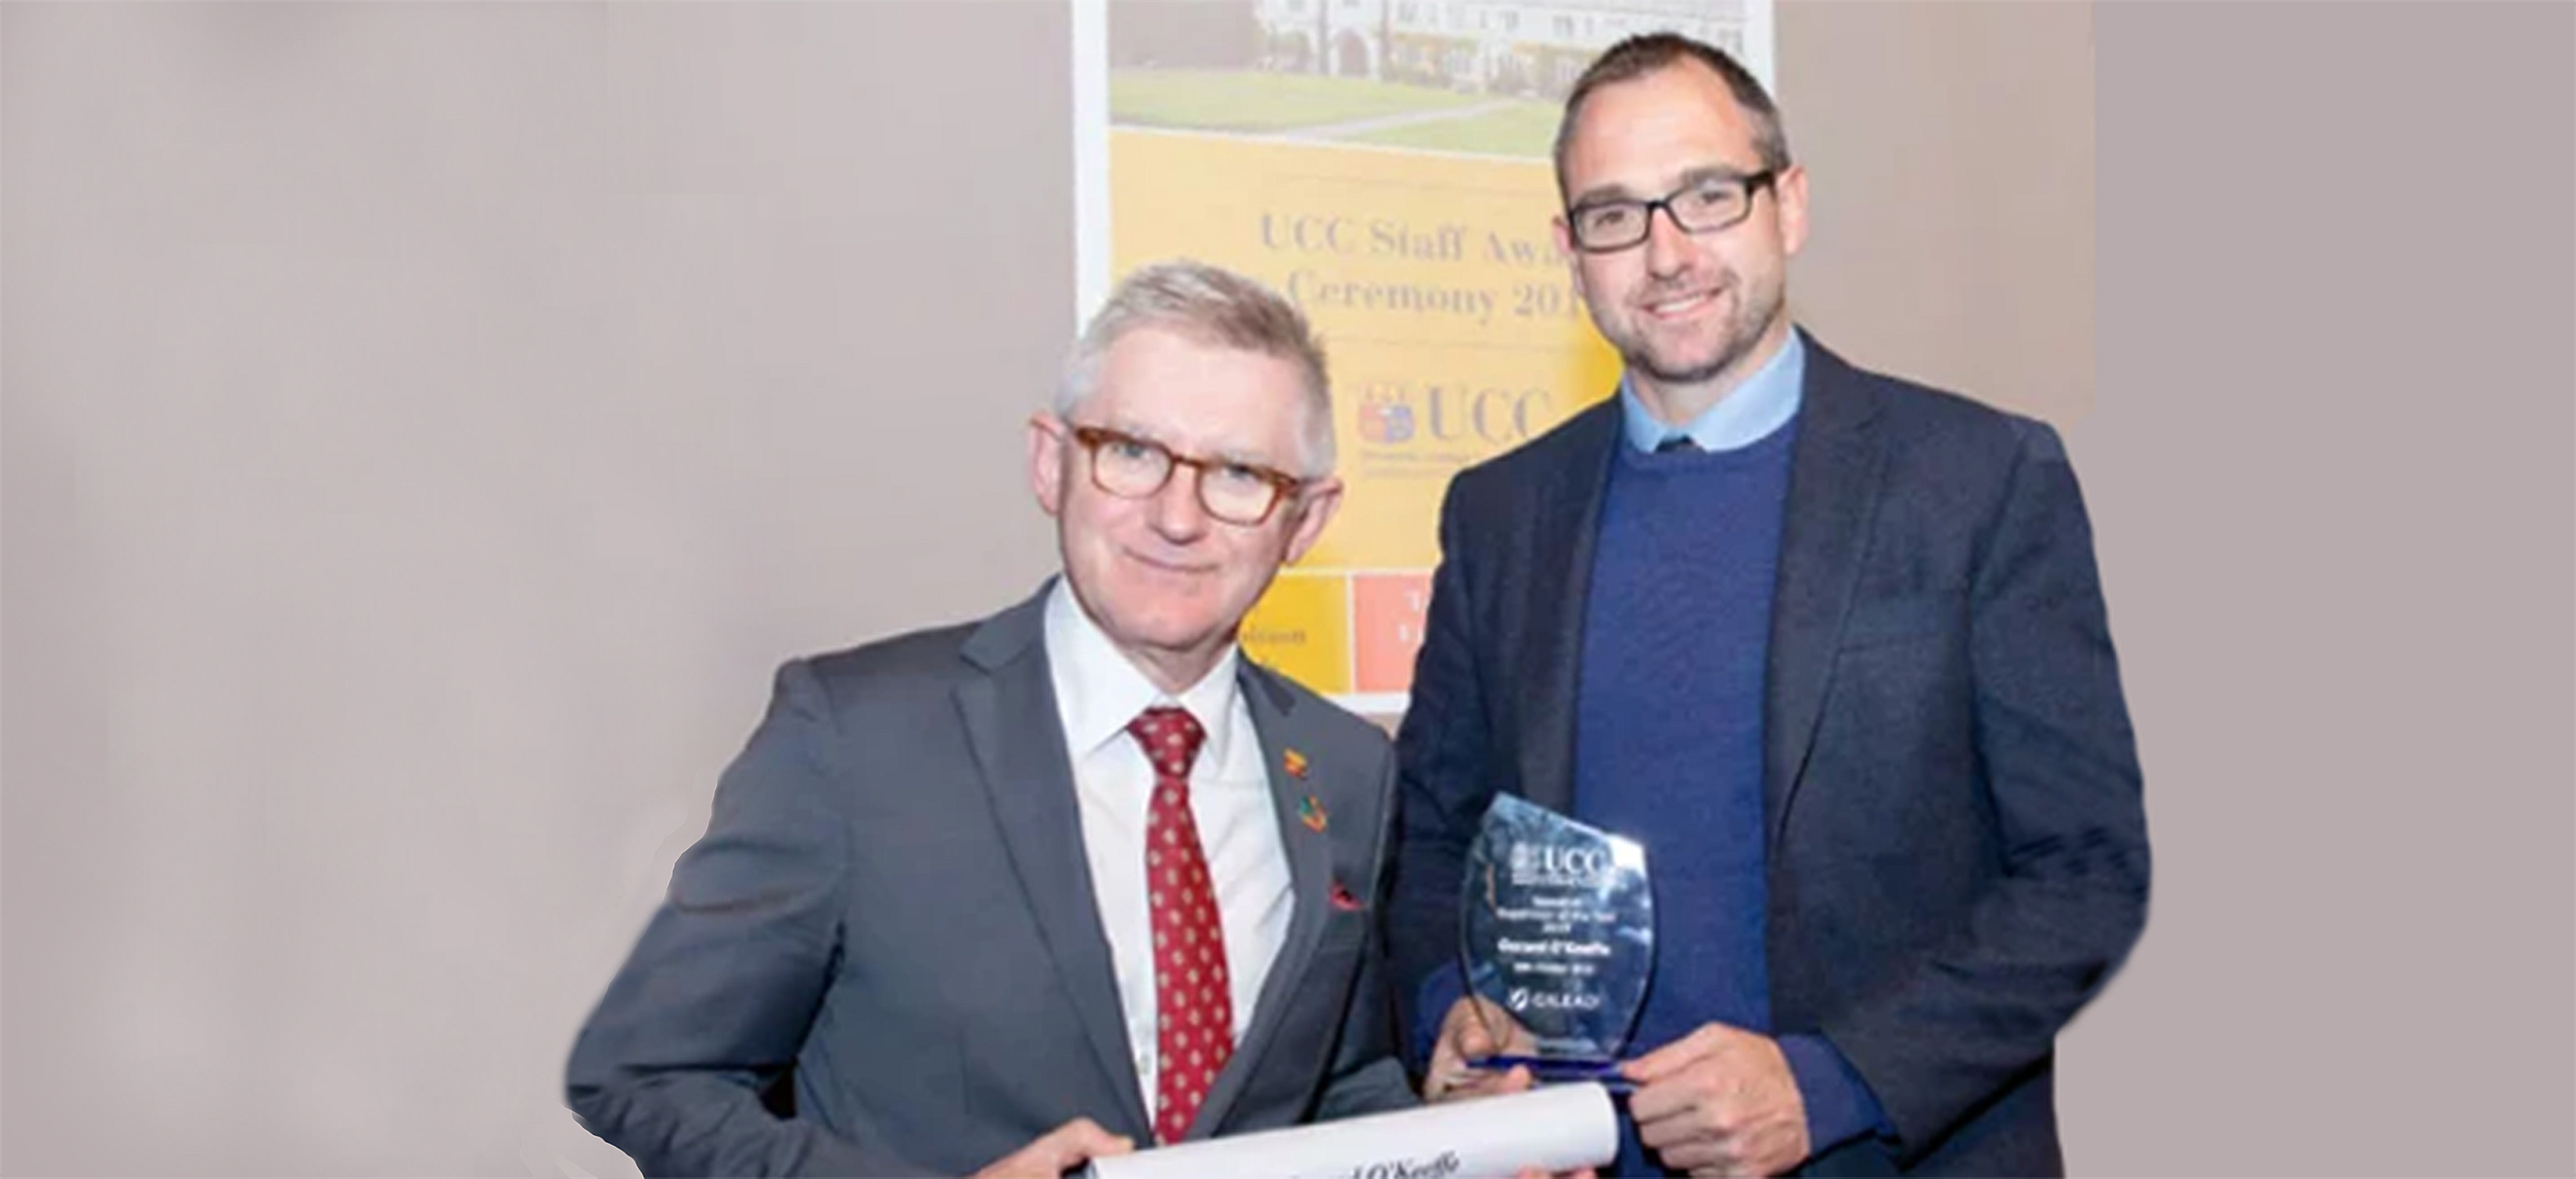 Congratulations to Ger O'Keeffe on the award of UCC Research Supervisor of the Year 2019